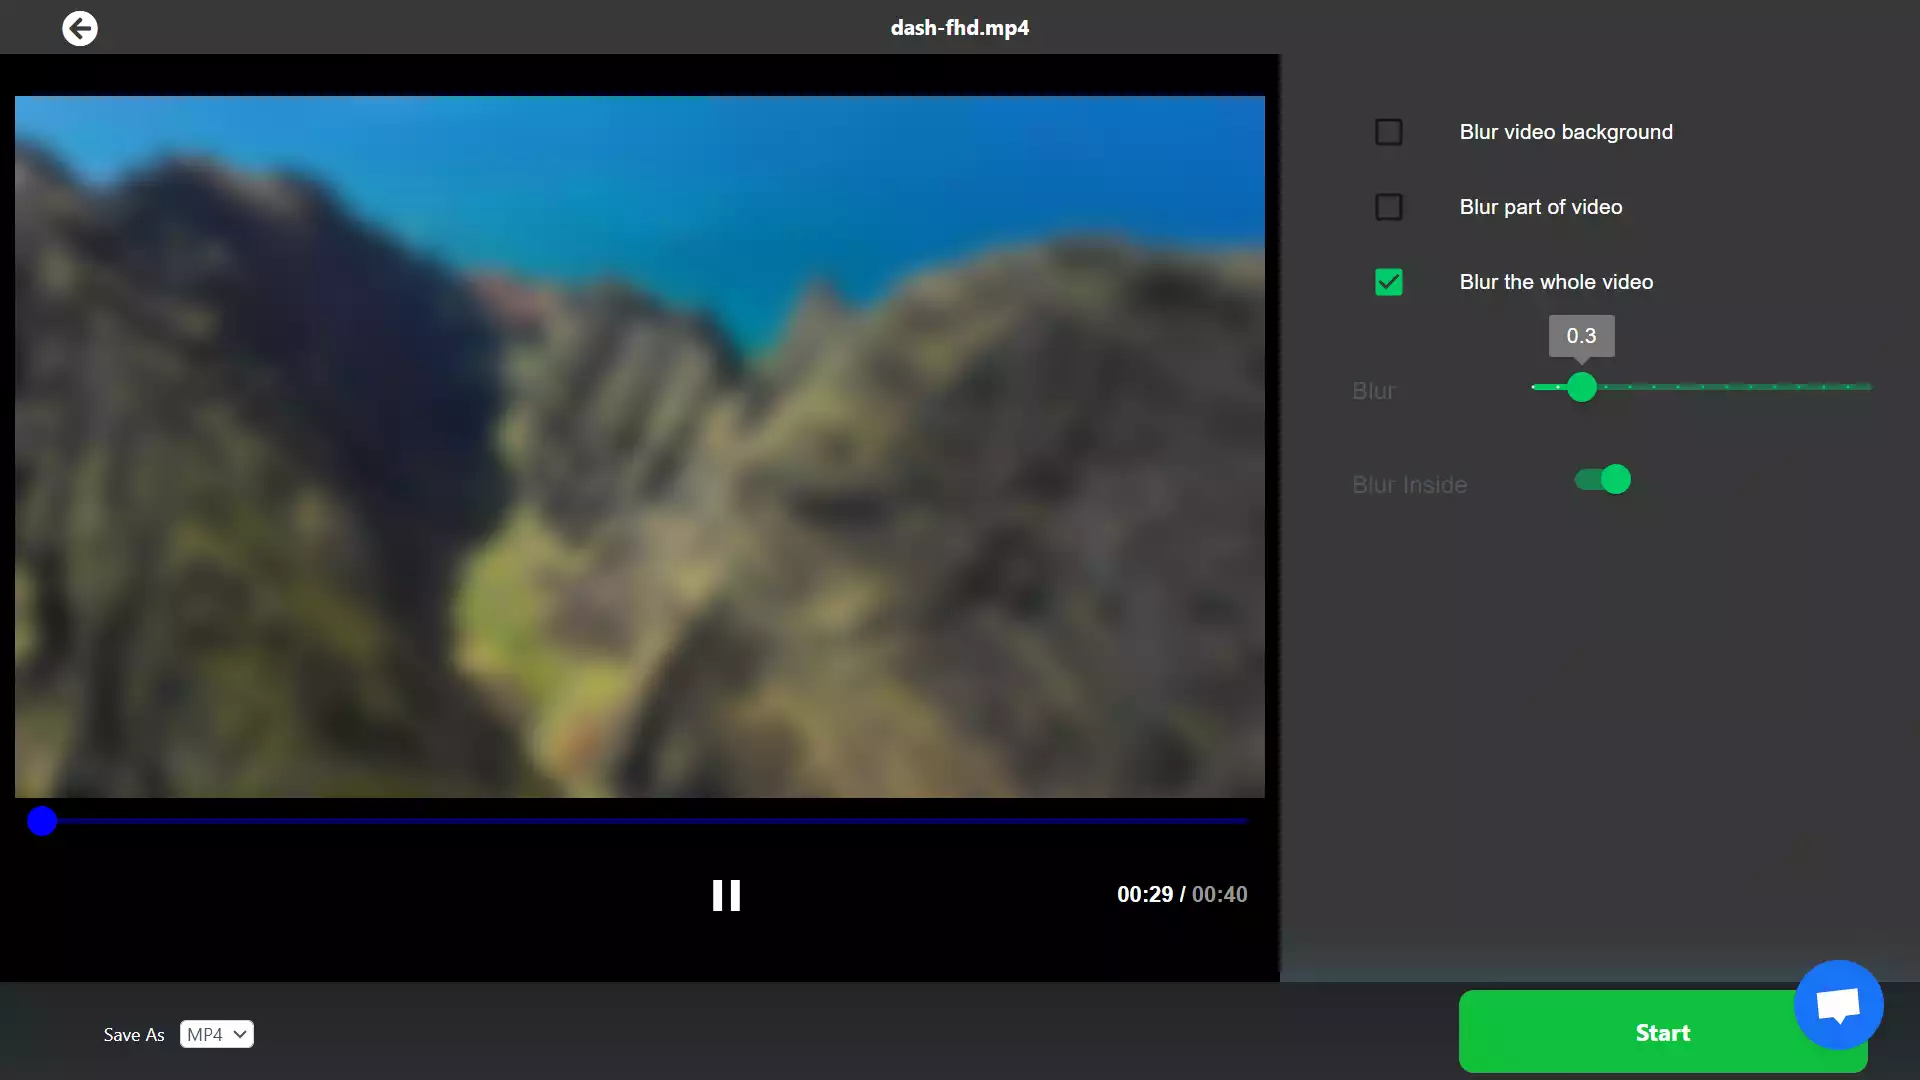 Blurring Video Backgrounds Automatically